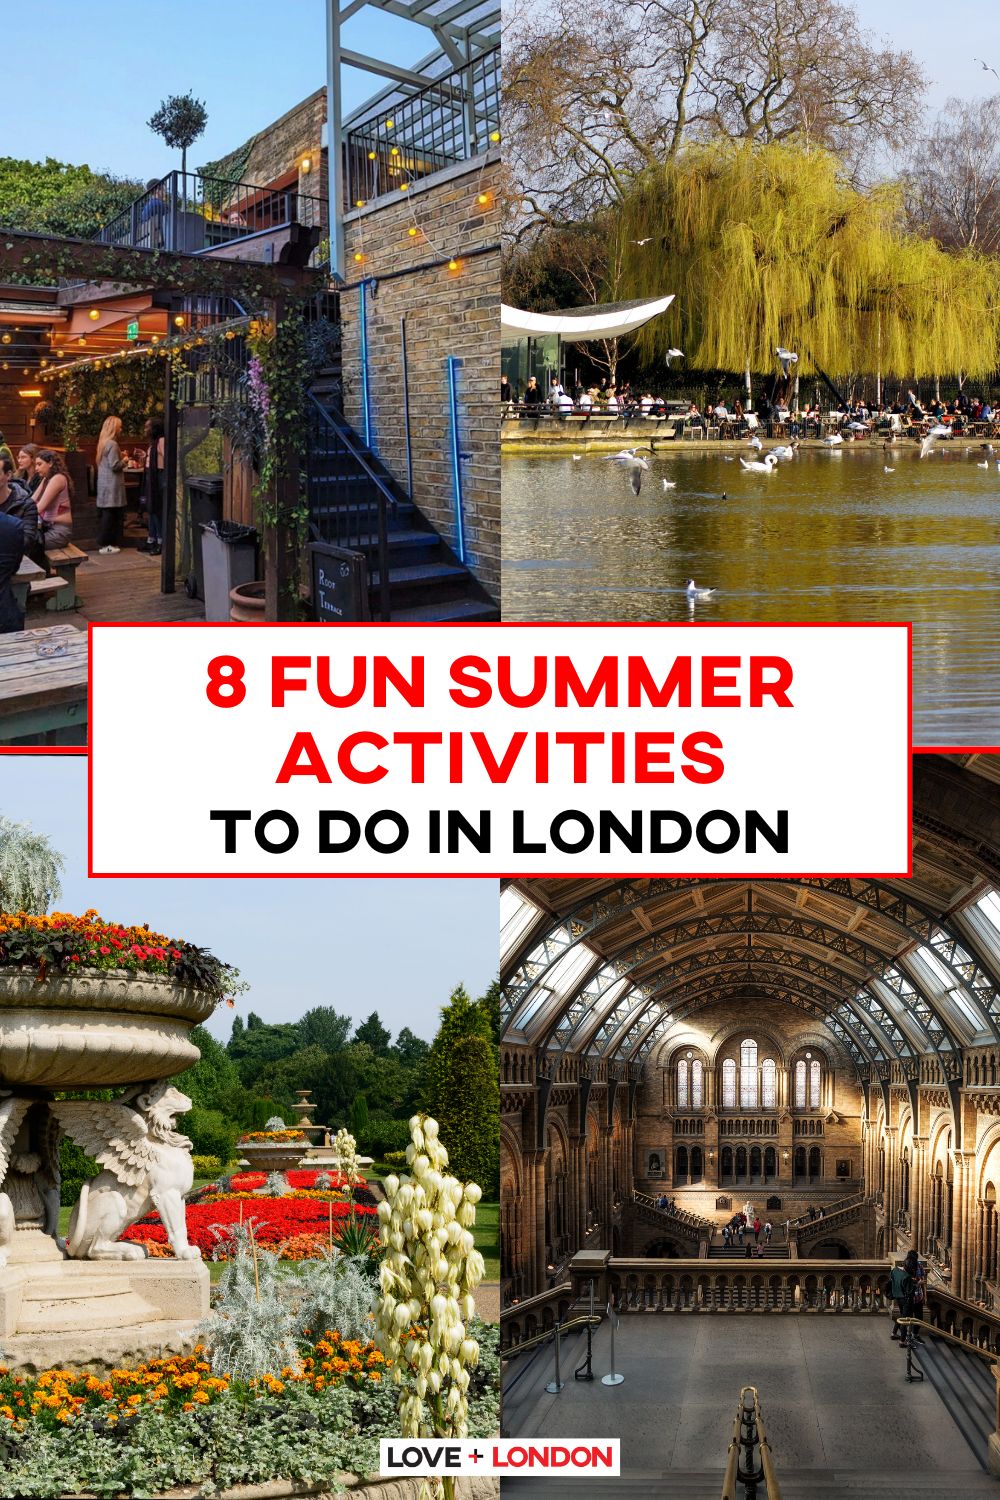 This is a Pinterest pin detailing 8 Fun Summer Activities To Do in London.